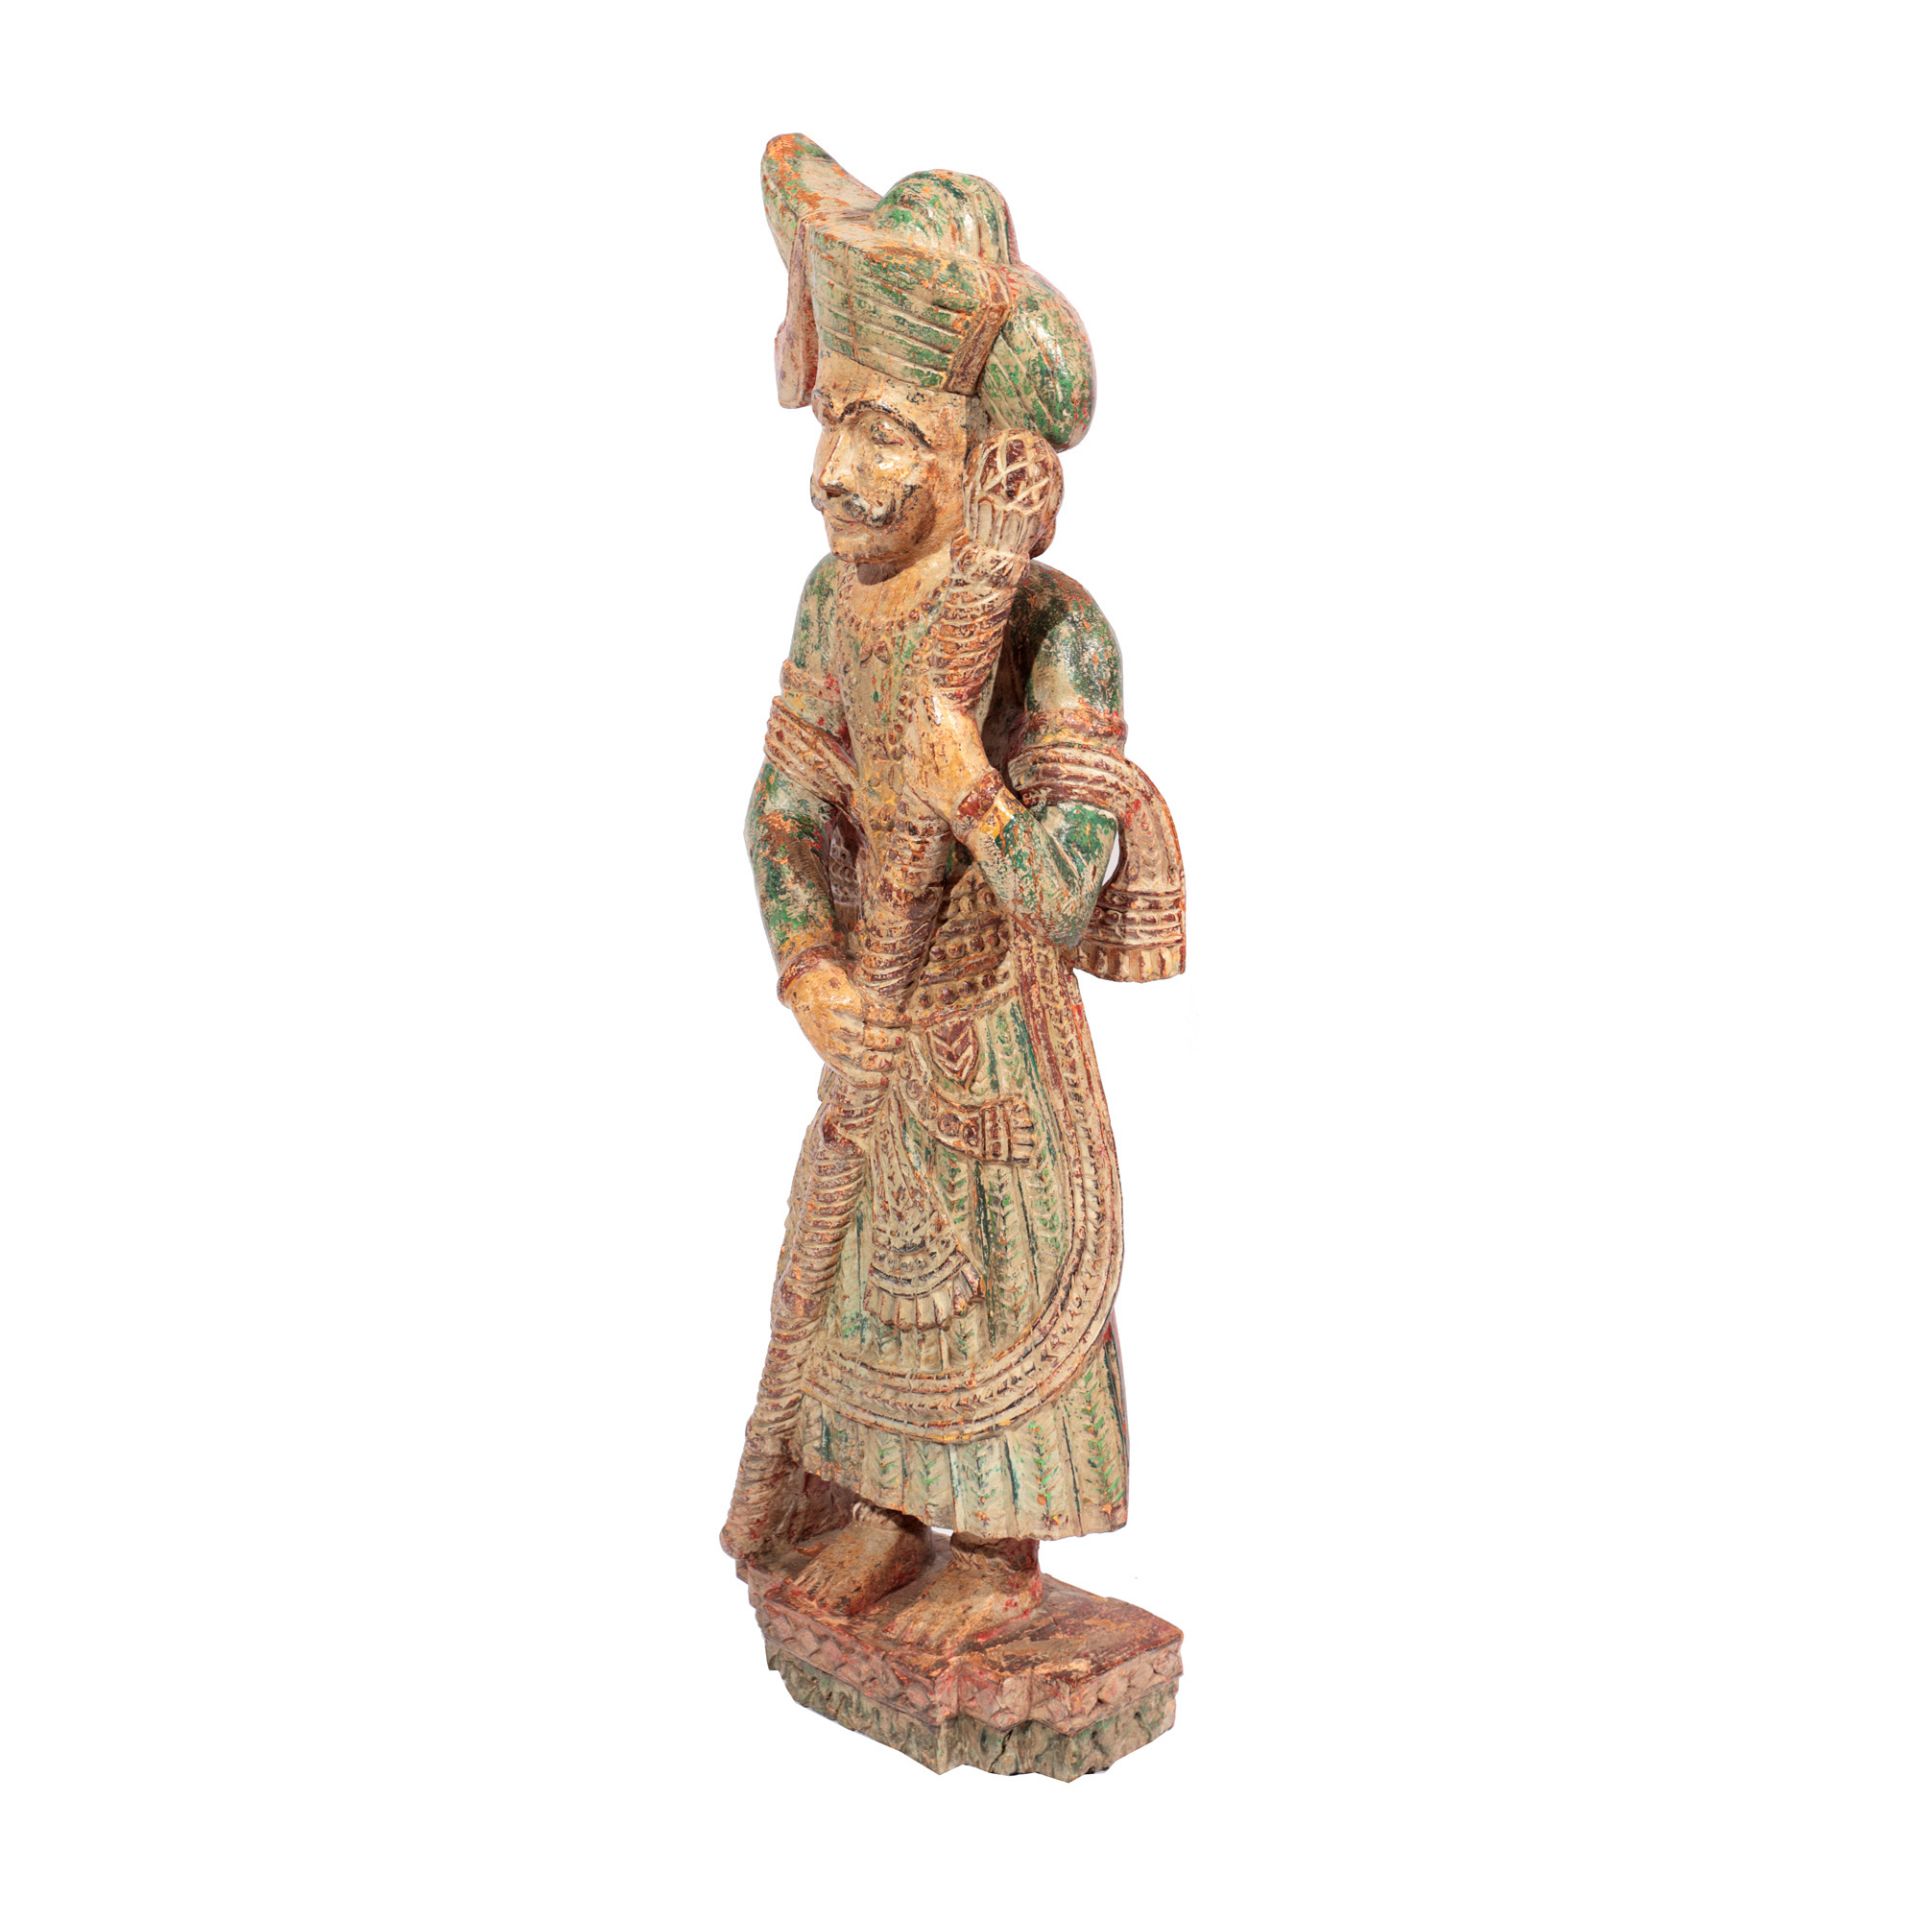 Indo-Persian statuette, painted wood, depicting a fighter, possibly early 19th century - Image 2 of 4